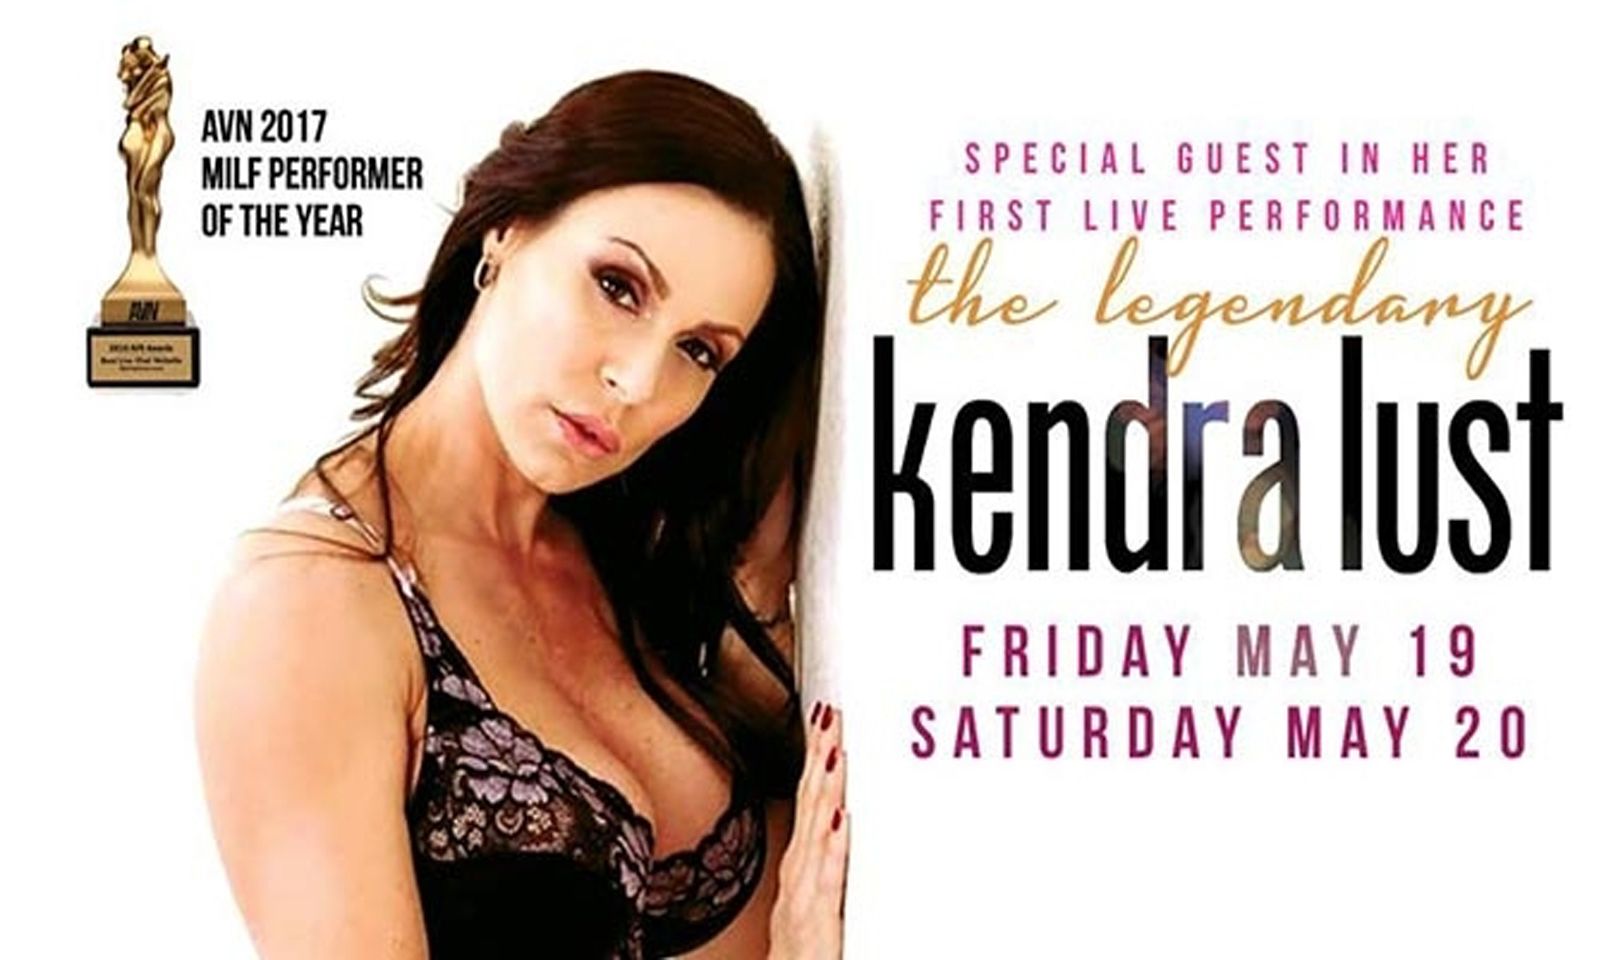 Kendra Lust Featuring at Gossip Gentleman’s Club in NY 